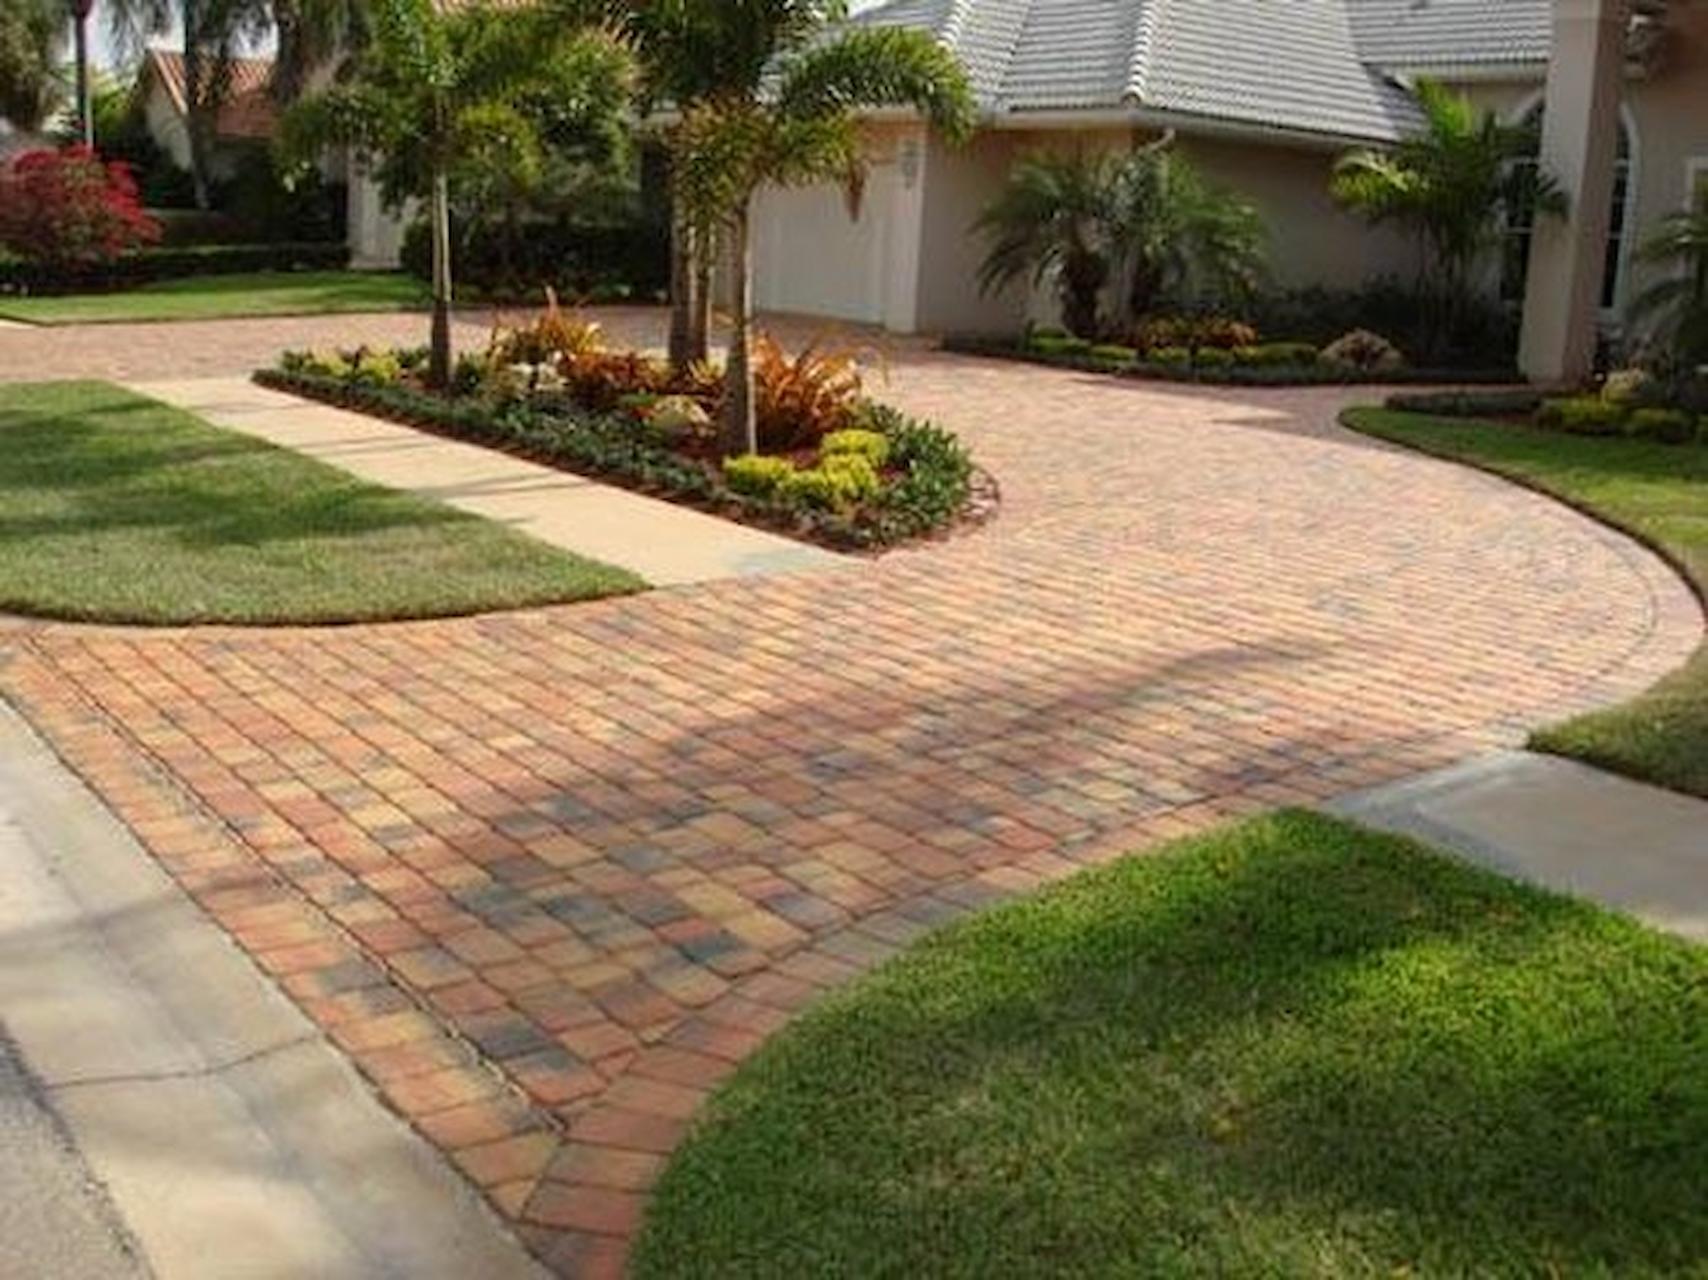 What Are The Advantages Of Having A Concrete Driveway?